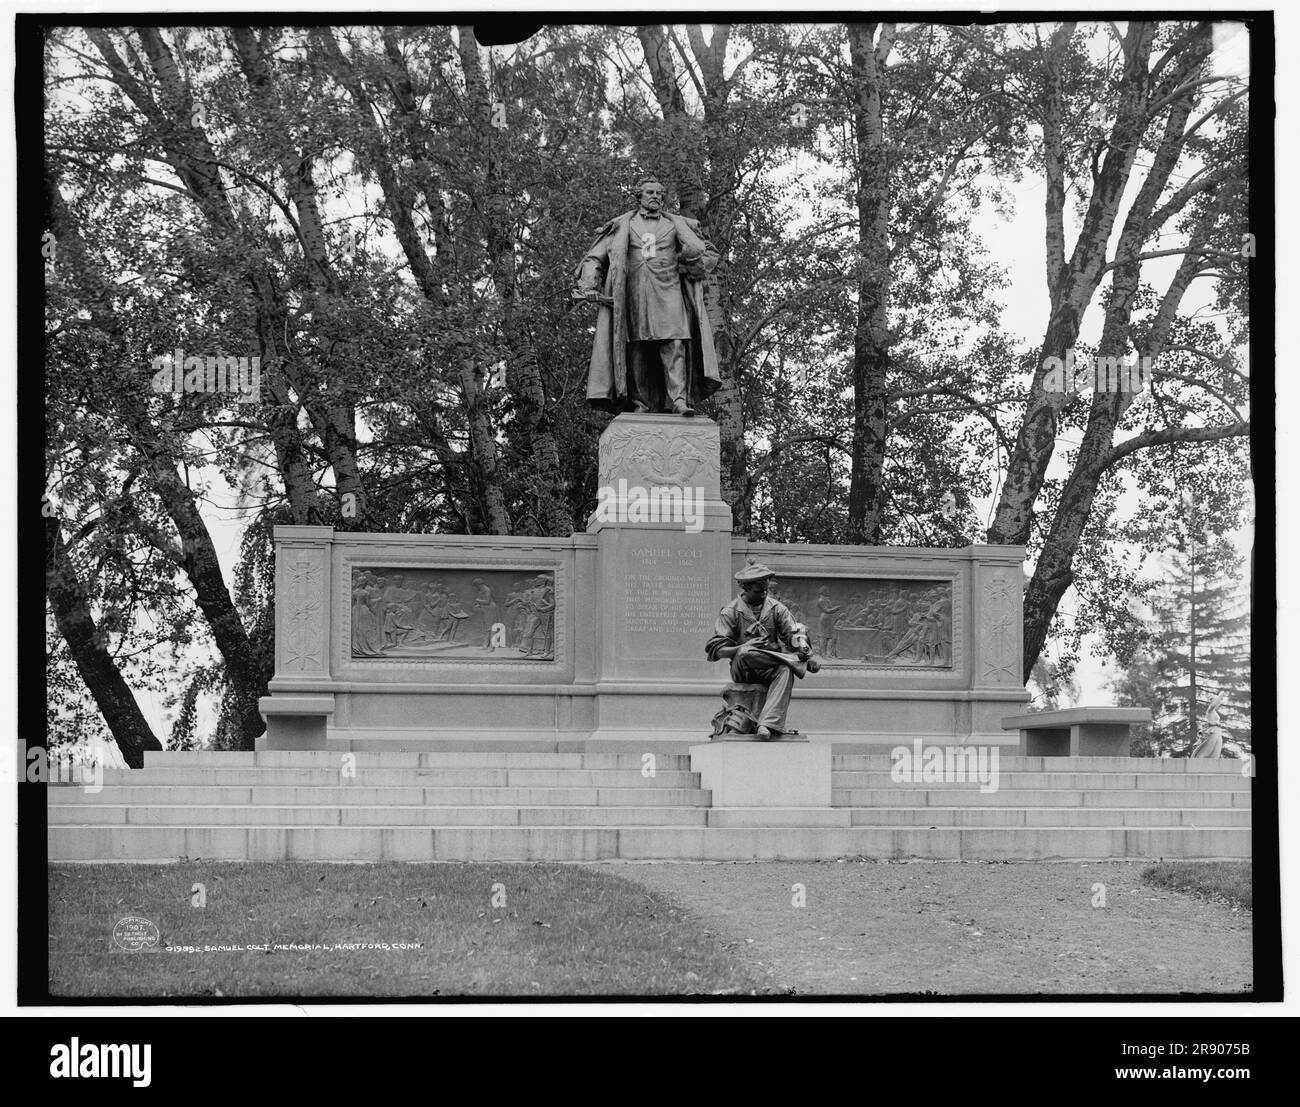 Samuel Colt Memorial, Hartford, Conn., c1907. Monument to American inventor, industrialist, businessman, manufacturer, gunmaker who 'significantly impacted Hartford and the United States through his technological innovations and the development of an industrial village'. In the foreground is 'a young Samuel whittling a revolver cylinder during his time as a mariner'. Sculptor, Randolph Rogers; architect, James G. Batterson. Stock Photo